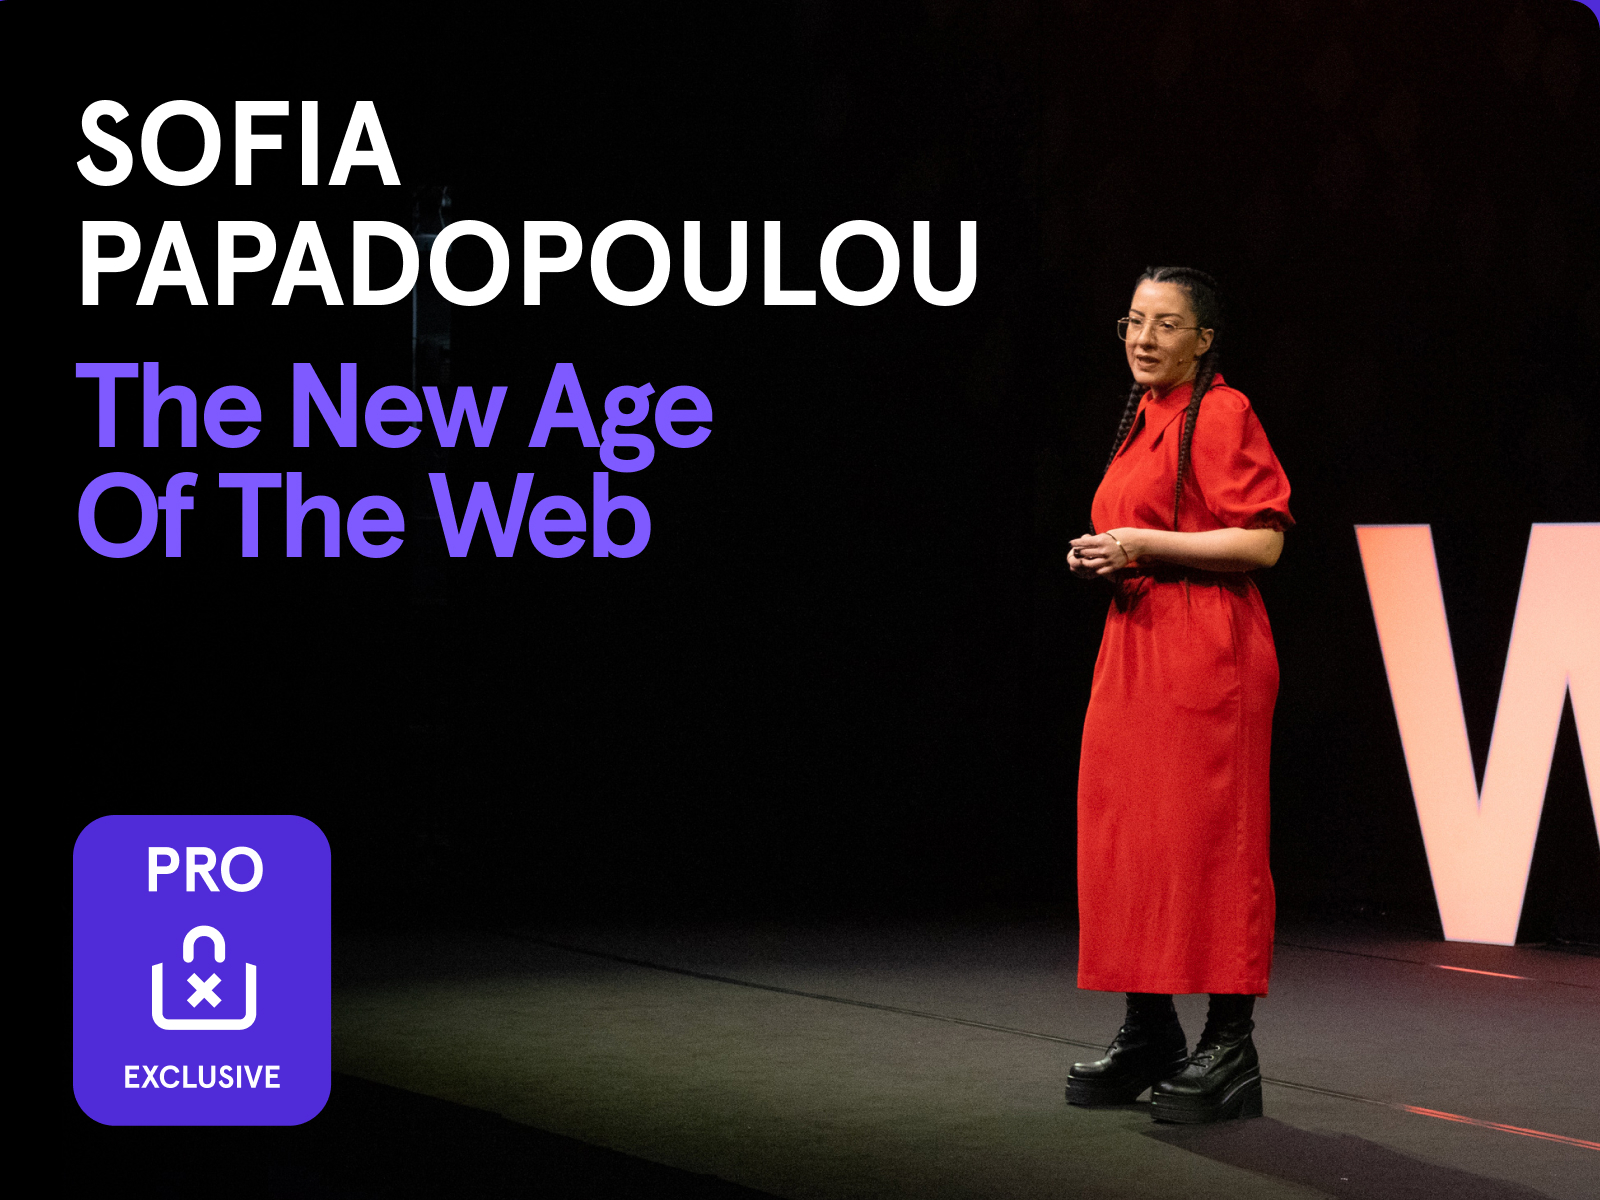 New PRO Content available: watch Sofia Papadopoulou's new talk from Awwwards Conference Amsterdam